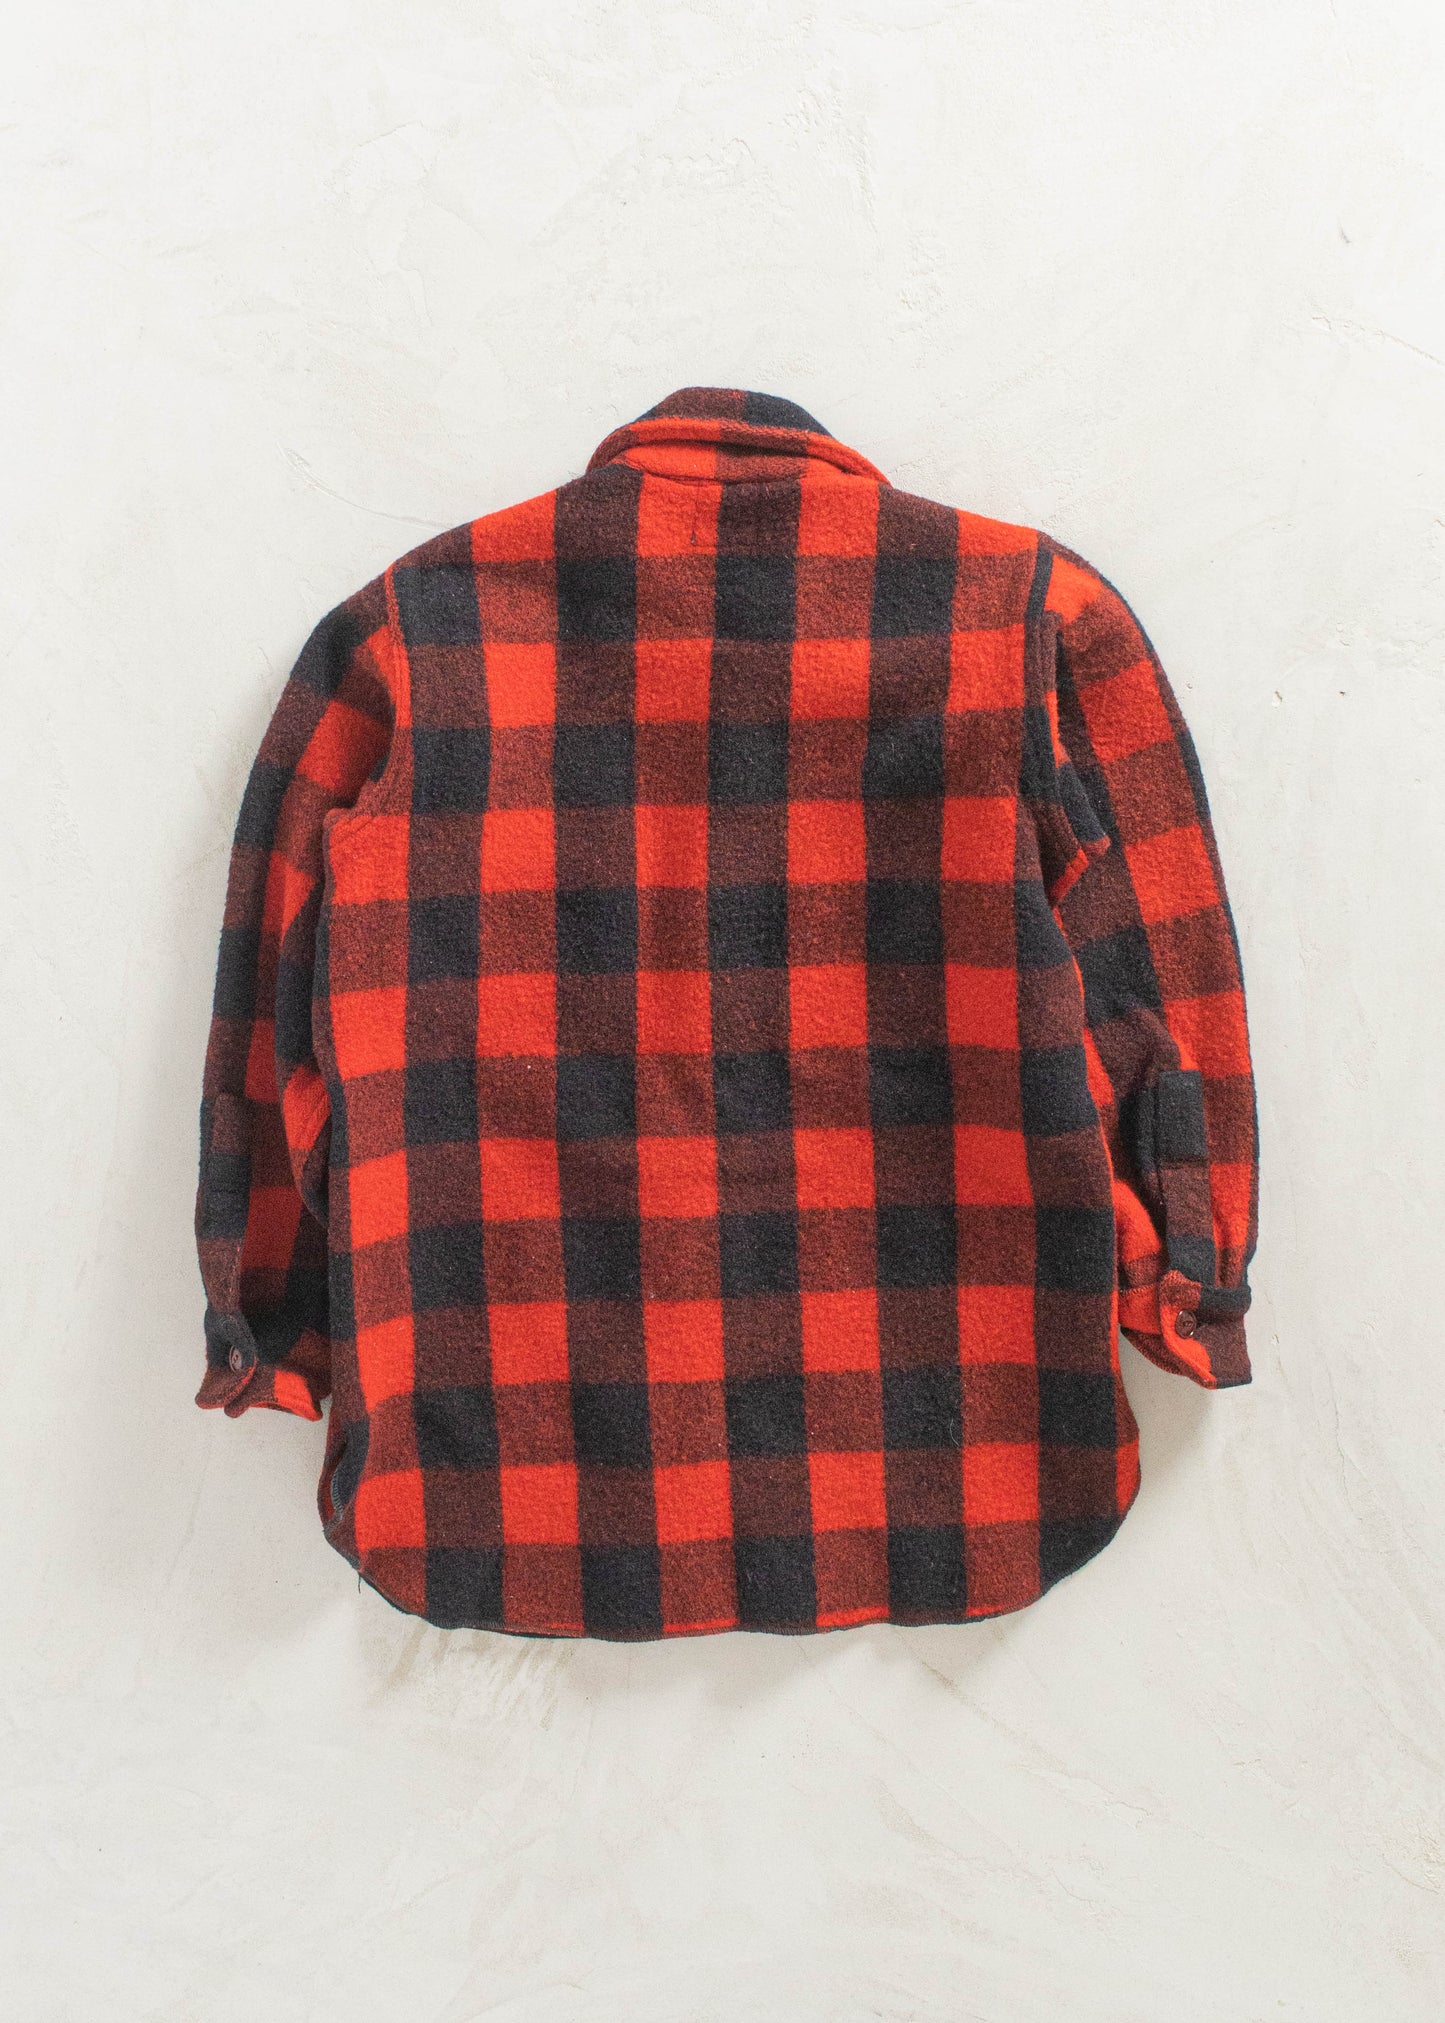 Vintage 1950s Woolrich Wool Flannel Button Up Shirt Size XS/S